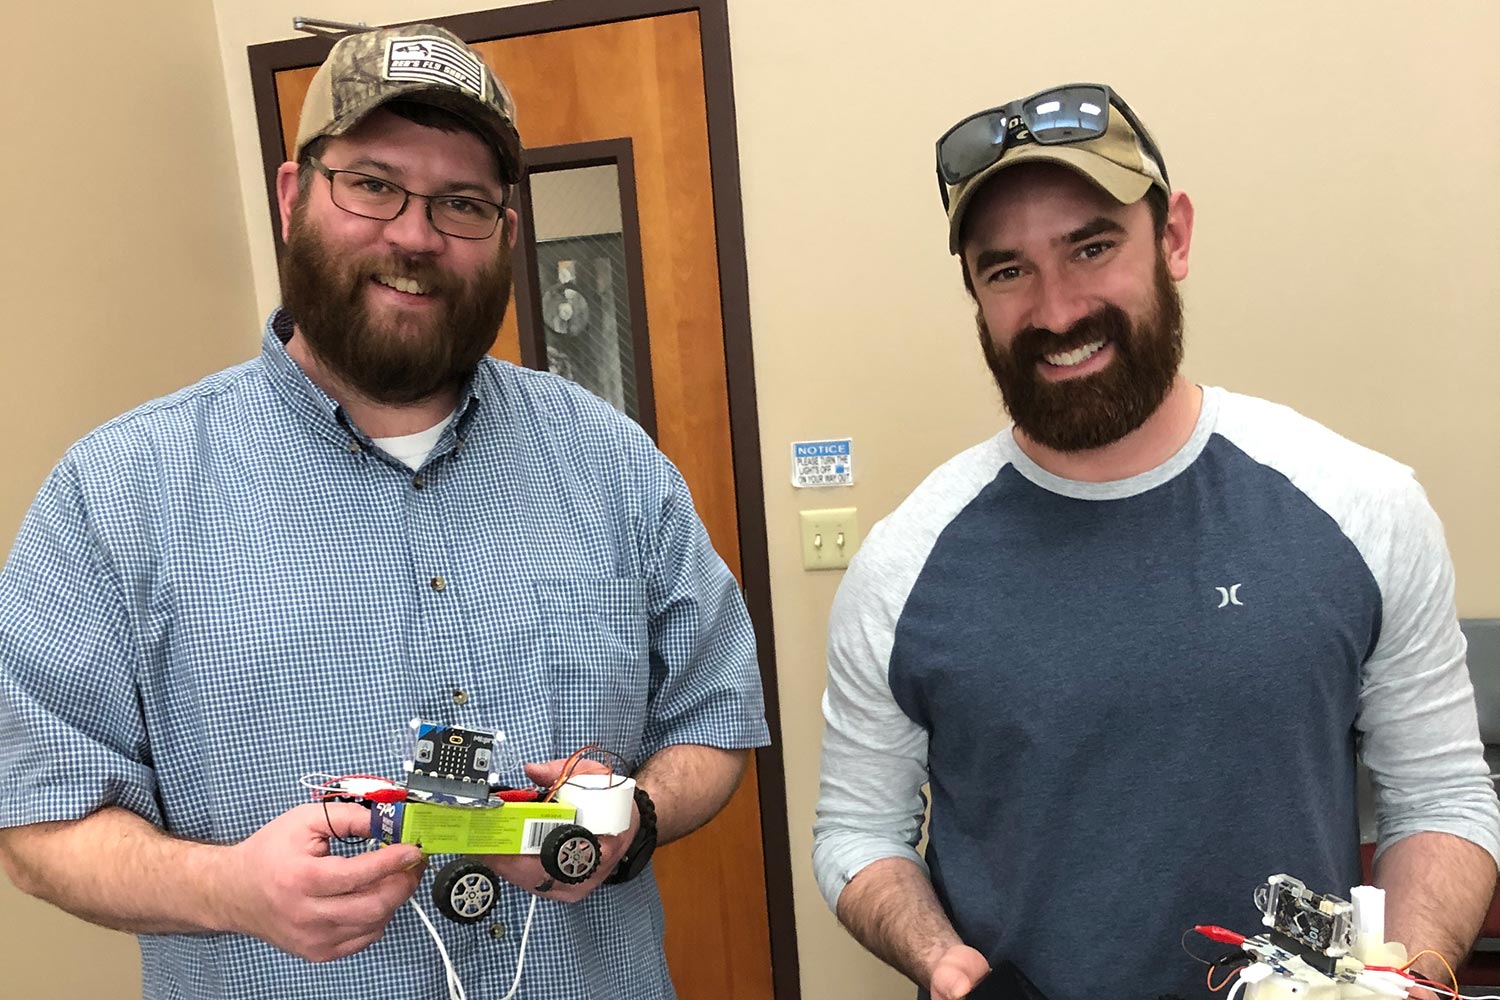 Teachers with their coded seed planter robots